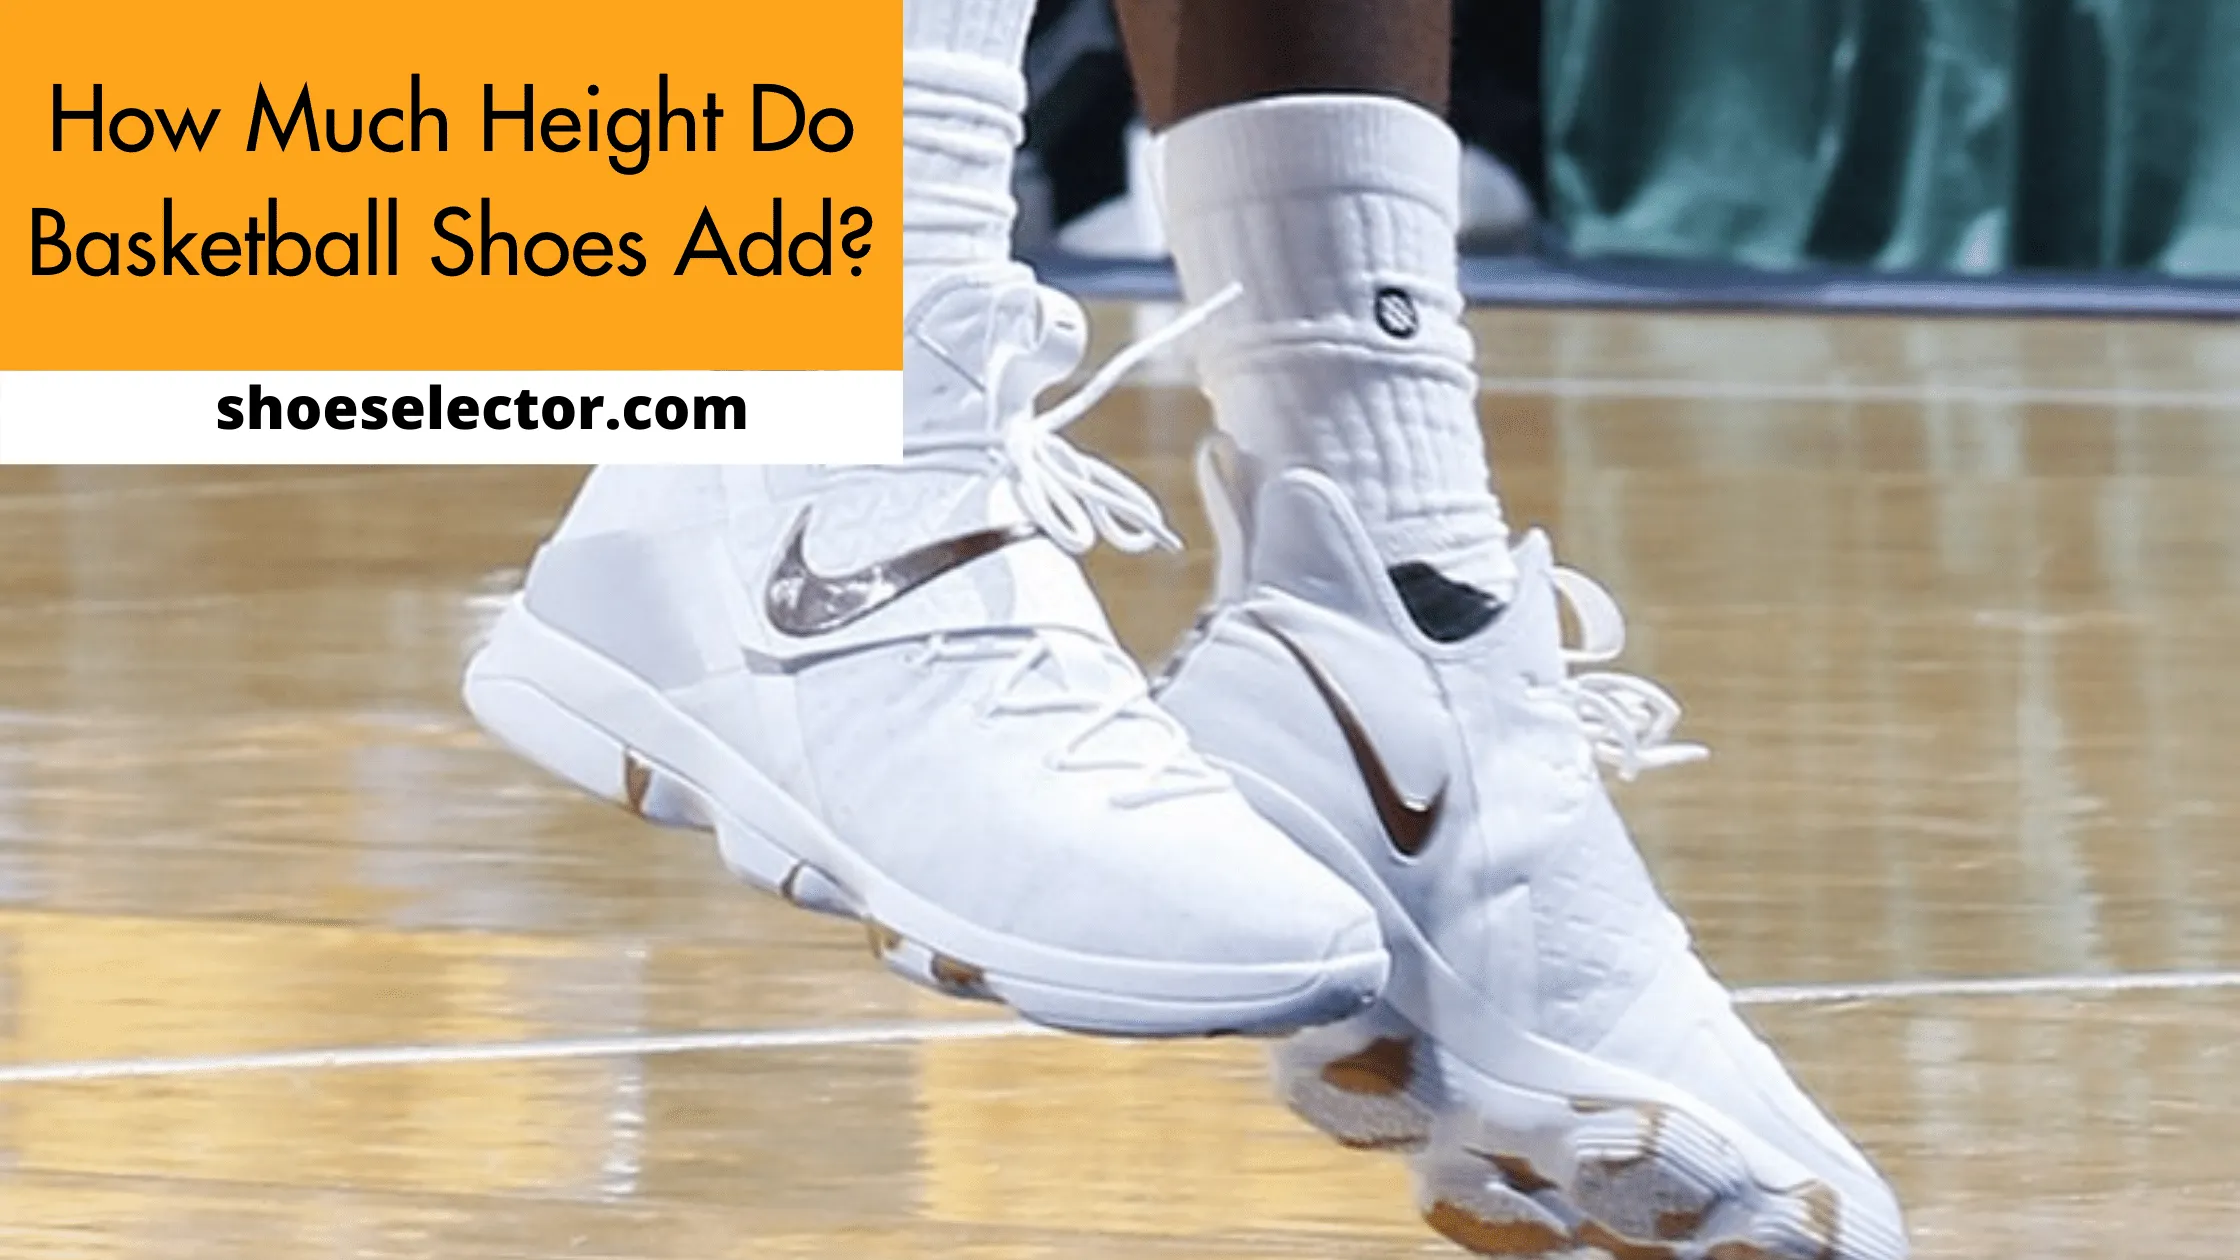 How Much Height Do Basketball Shoes Add? - Simple Guide